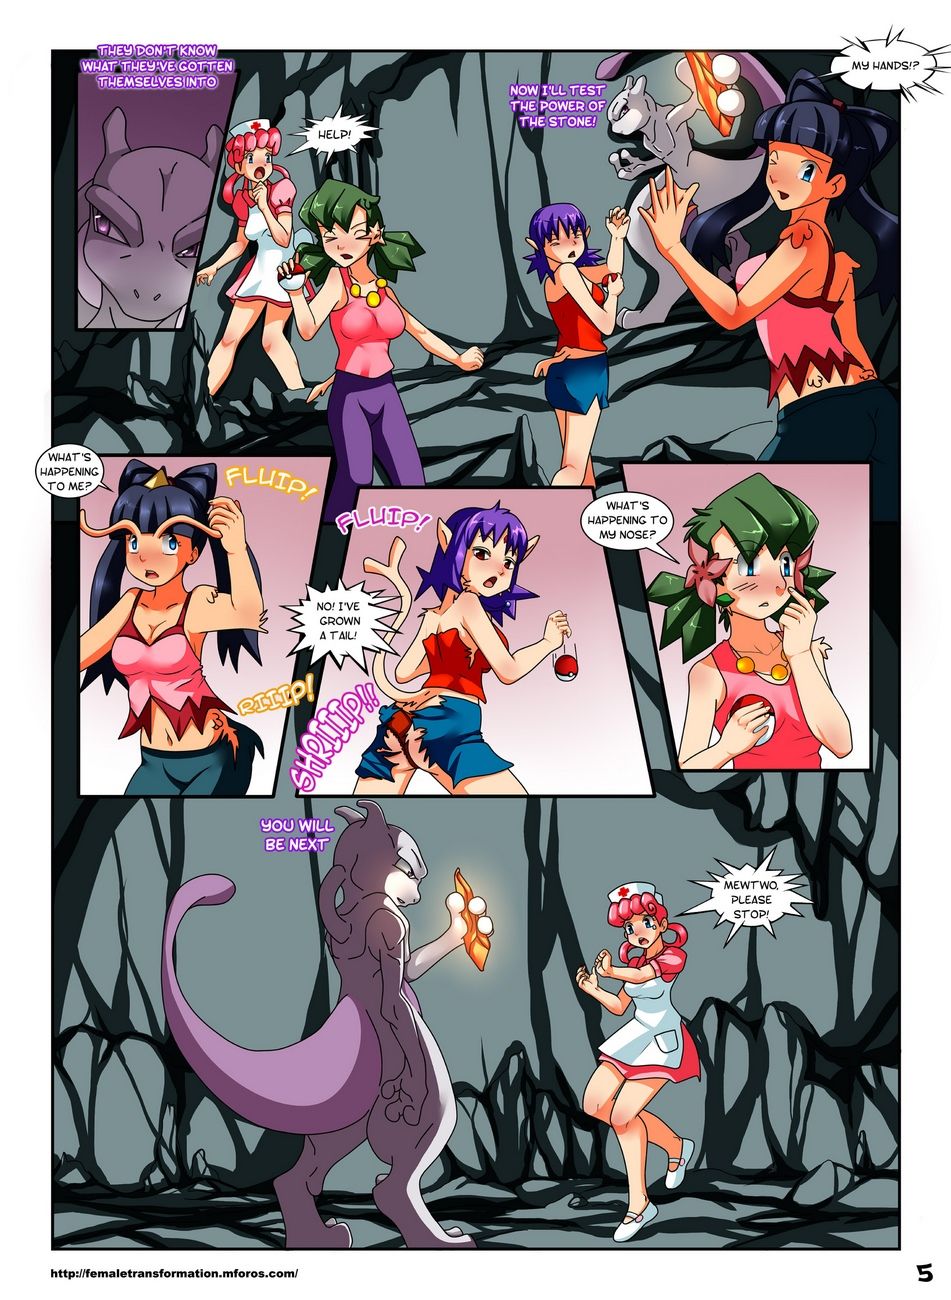 Pokemaidens 1 page 6